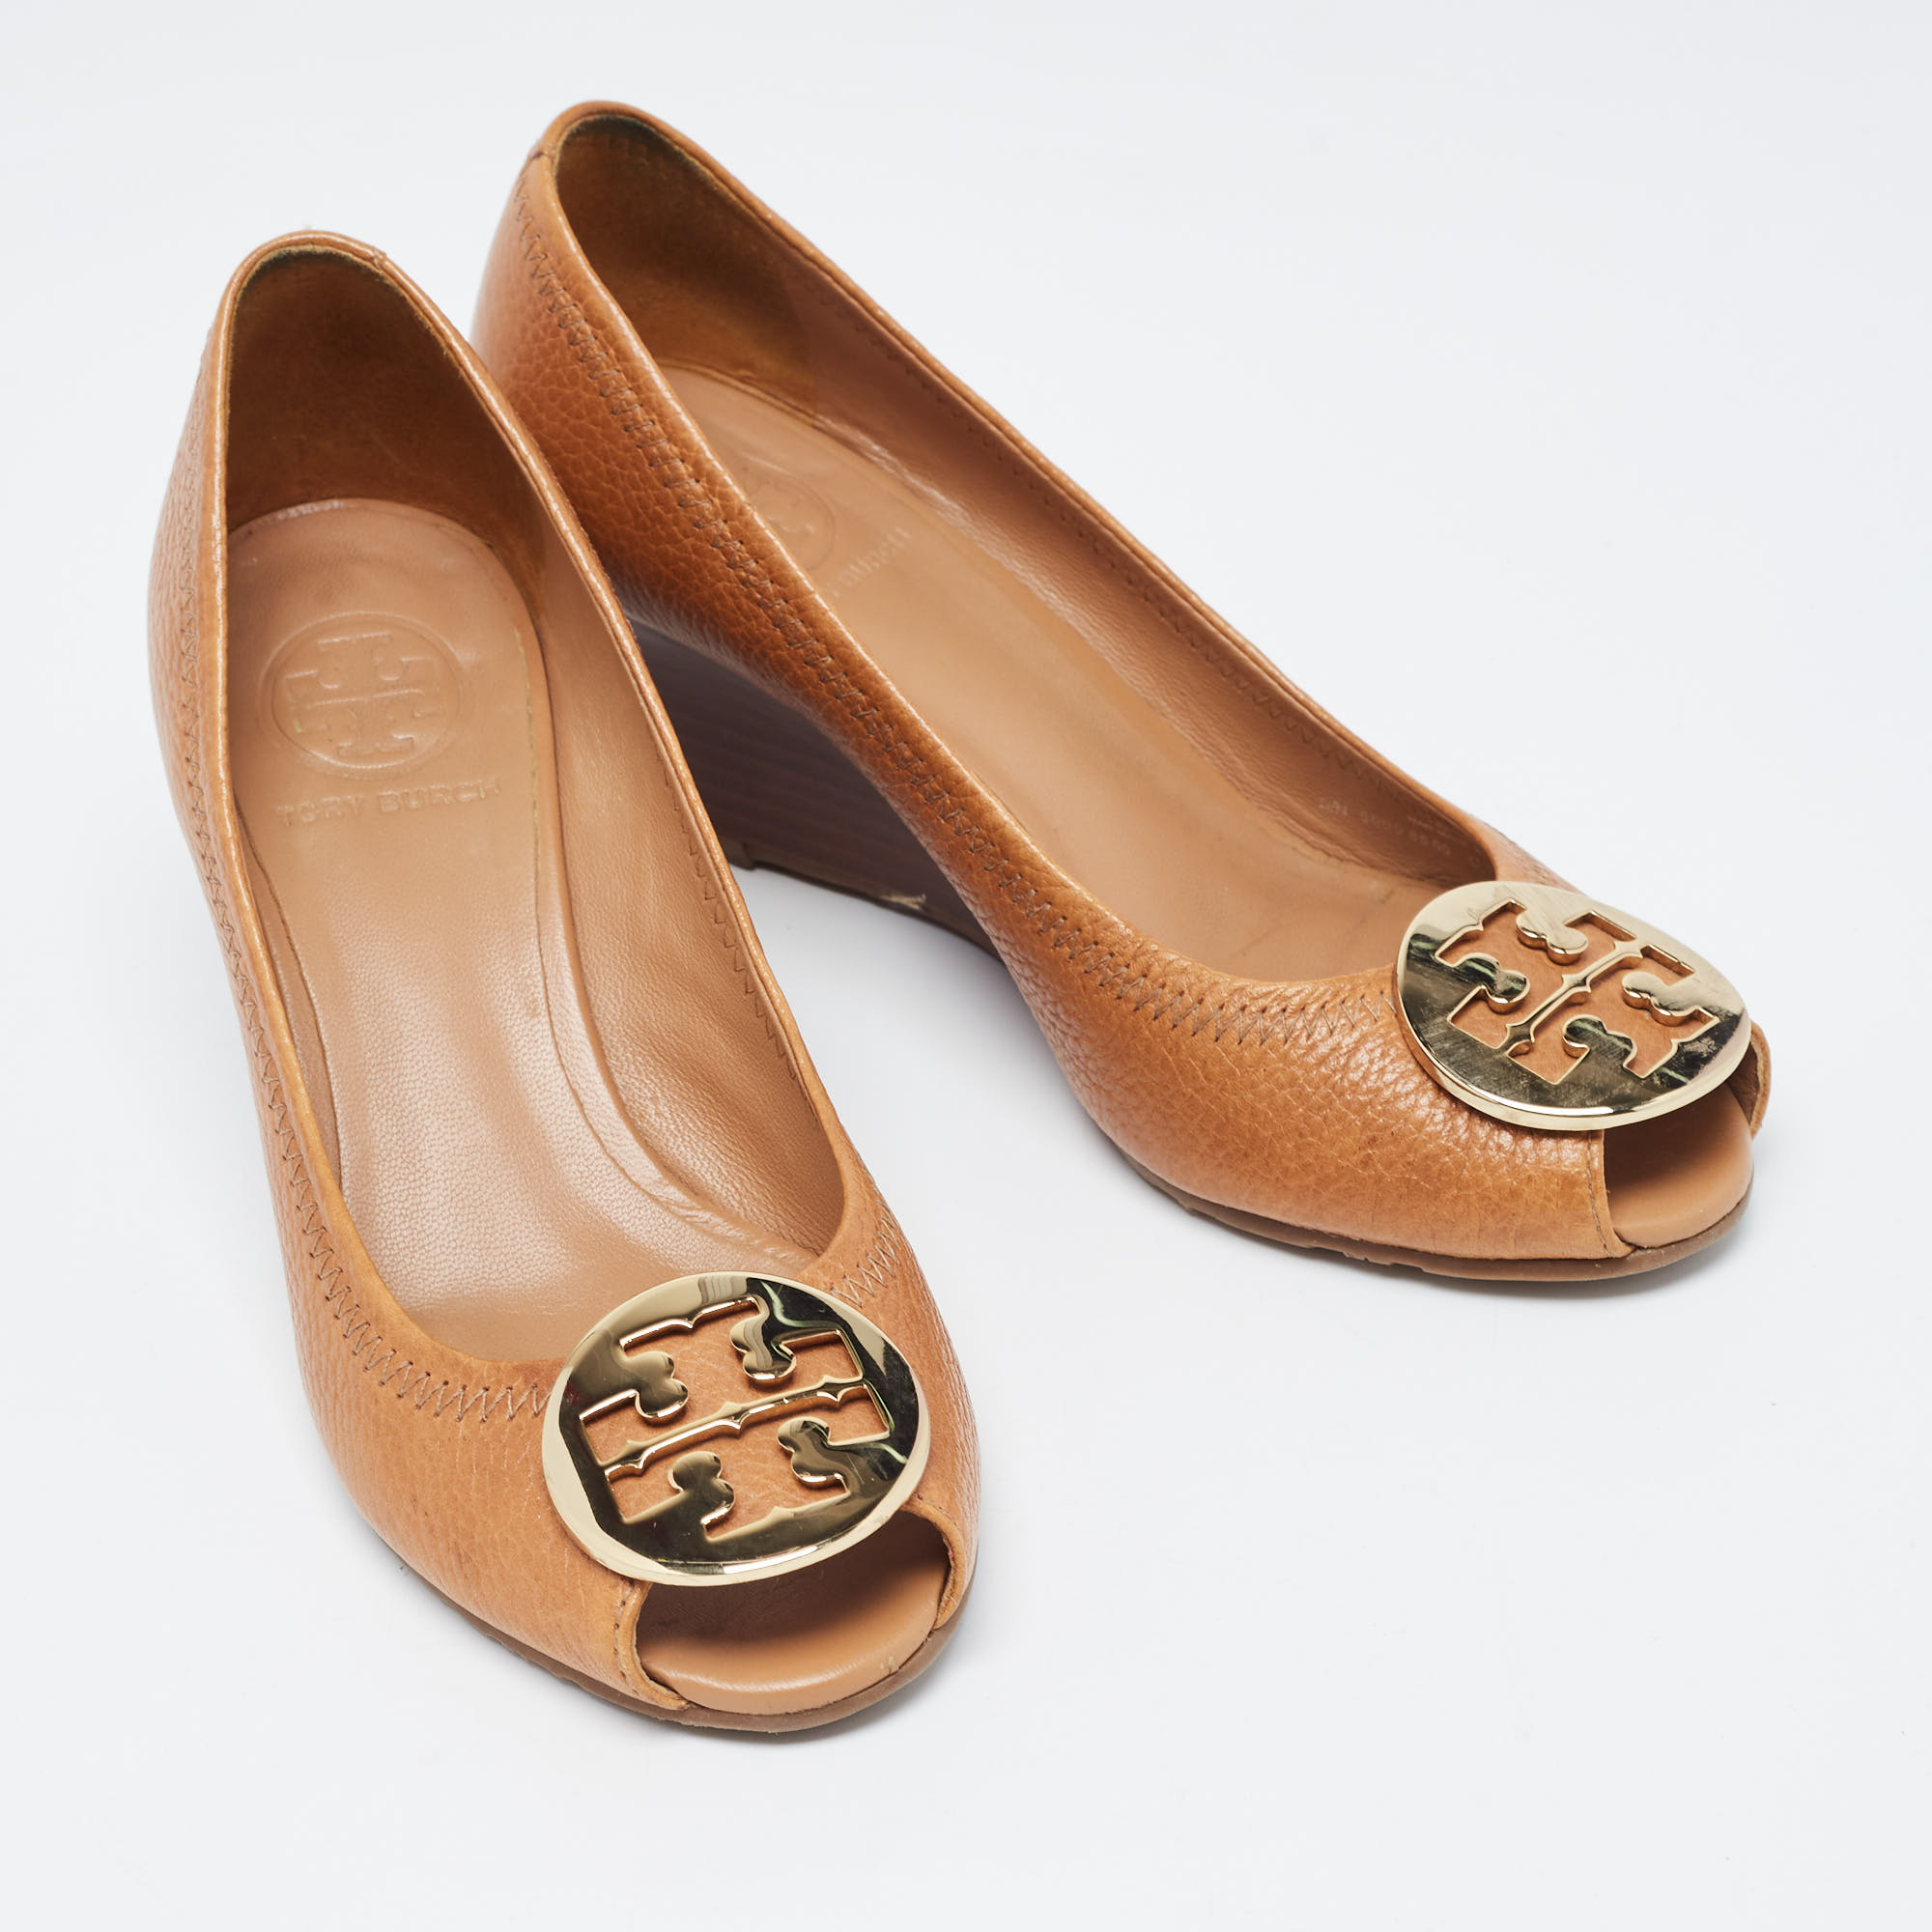 Tory Burch Tan Leather Sally Wedge Pumps Size 36.5